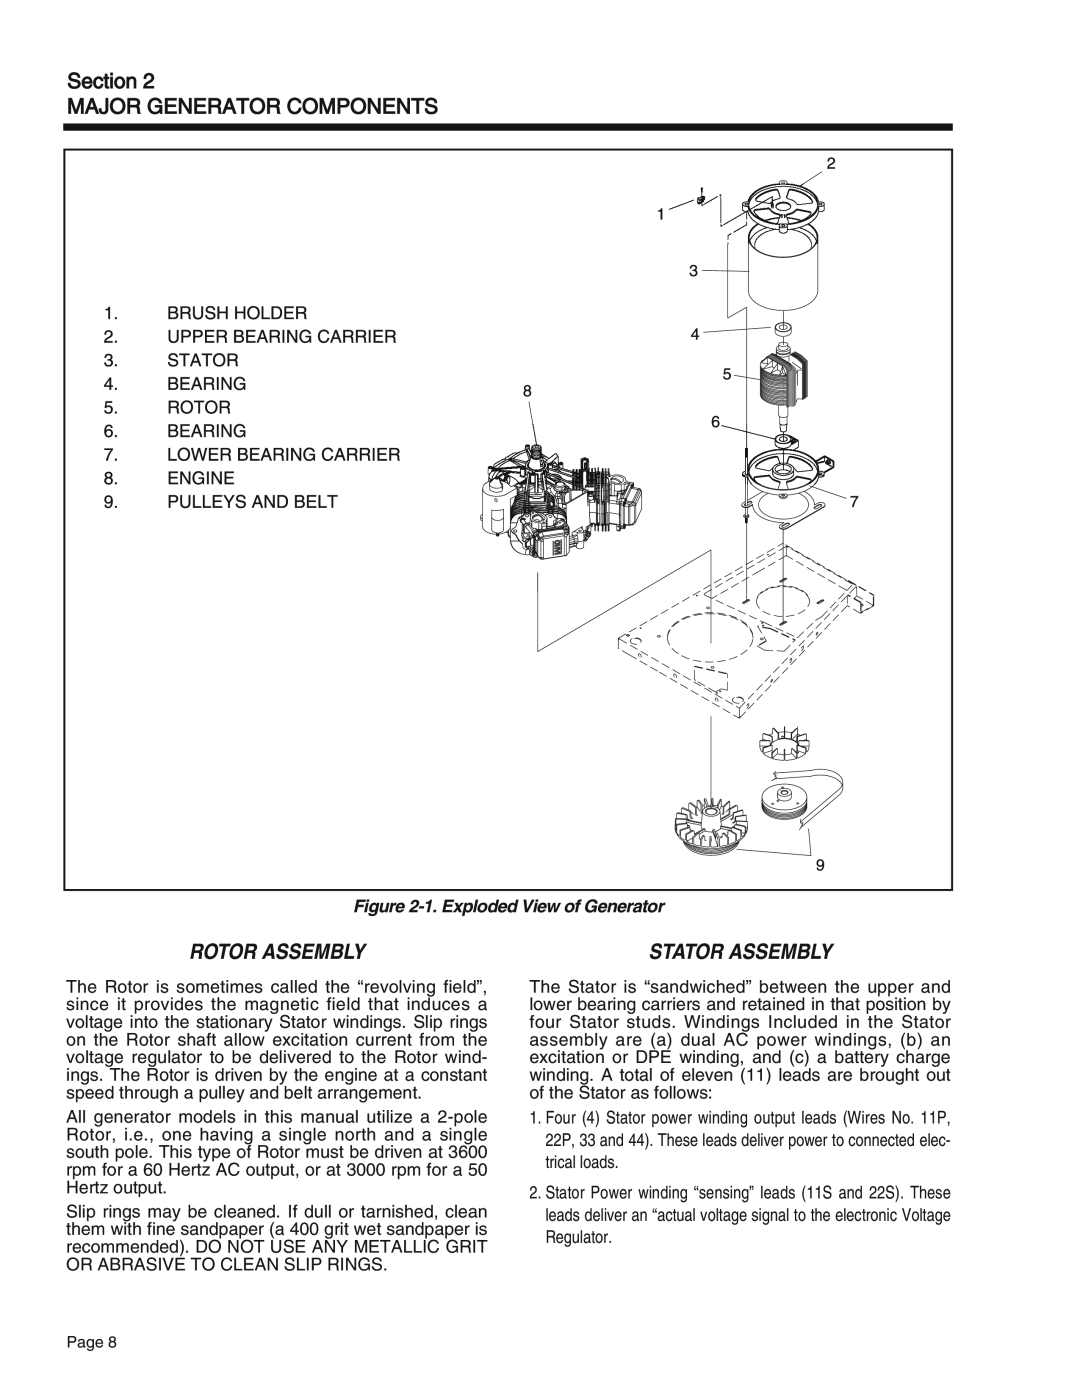 Generac Power Systems 75 Section MAJOR GENERATOR COMPONENTS, Rotor Assembly, 1.Exploded View of Generator, Stator Assembly 